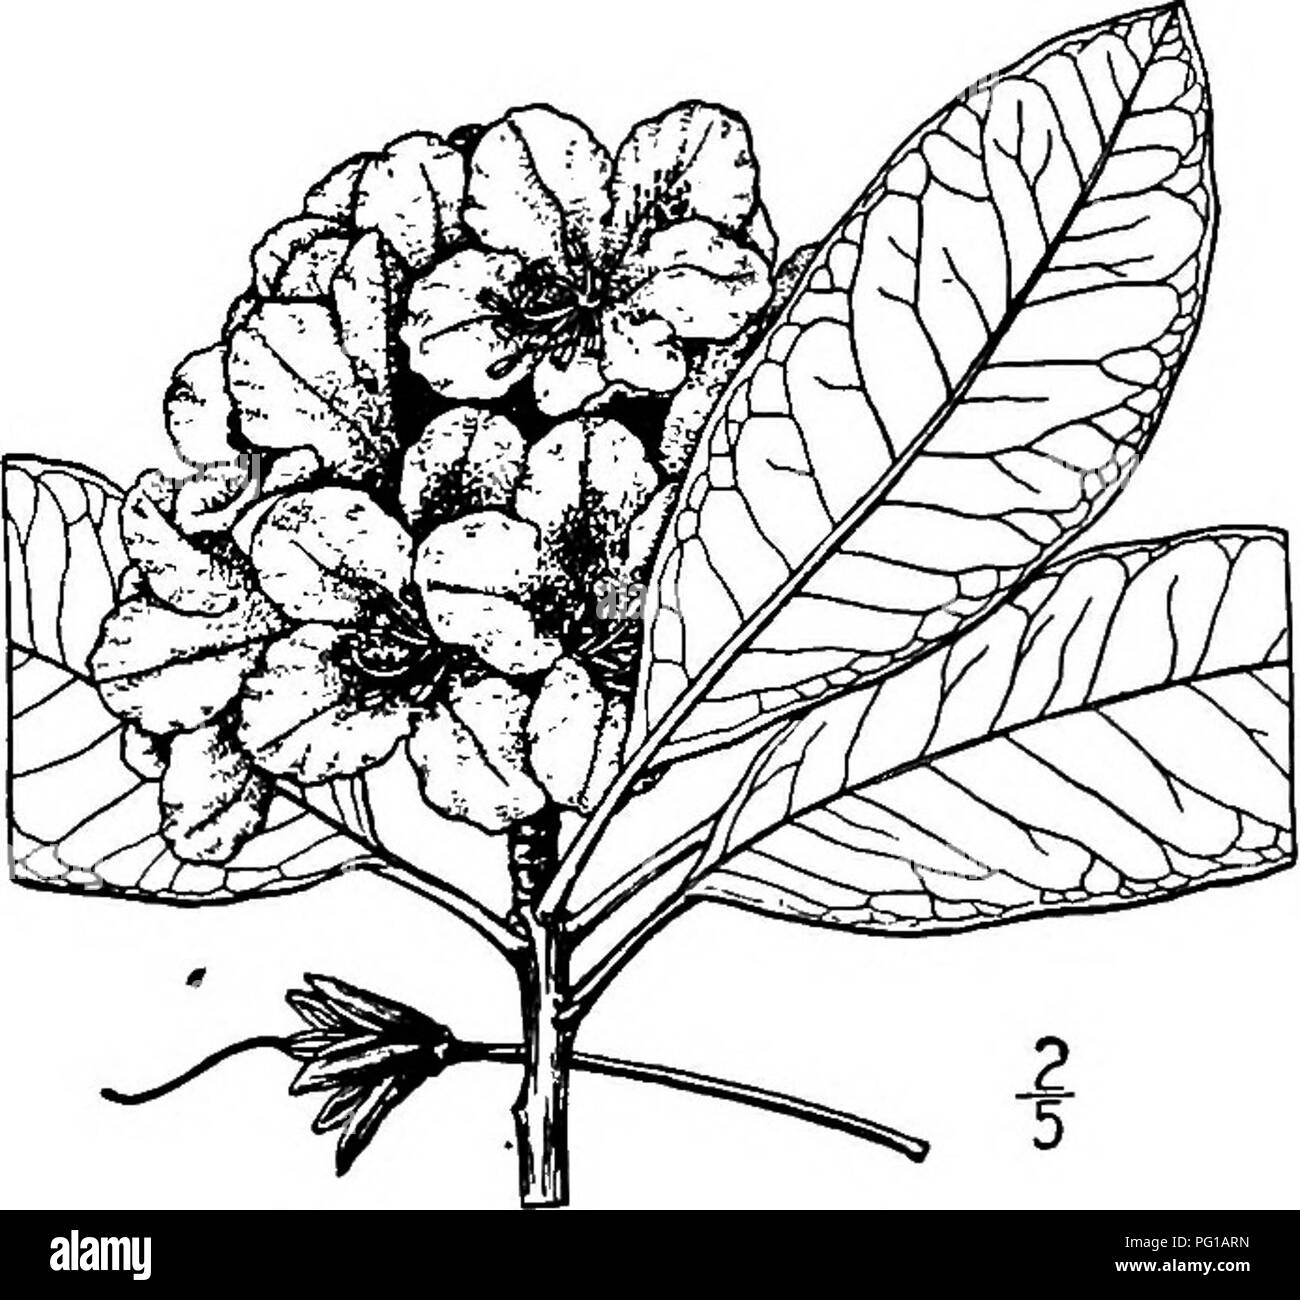 . North American trees : being descriptions and illustrations of the trees growing independently of cultivation in North America, north of Mexico and the West Indies . Trees. 754 The Rhododendrons and leathery, oblong or oval, 8 to 12 cm. long, pointed at the apex, rounded, narrowed, or somewhat heart-shaped at the base, revolute on the margin, dark green, smooth and shining above, pale and glaucous with the midrib prominent beneath; the leaf-stalk is stout and broad, about 3 cm. long. The flowers ap- pear in May and June in dense clusters often 13 cm. across, on stout pedicels which are hairy Stock Photo